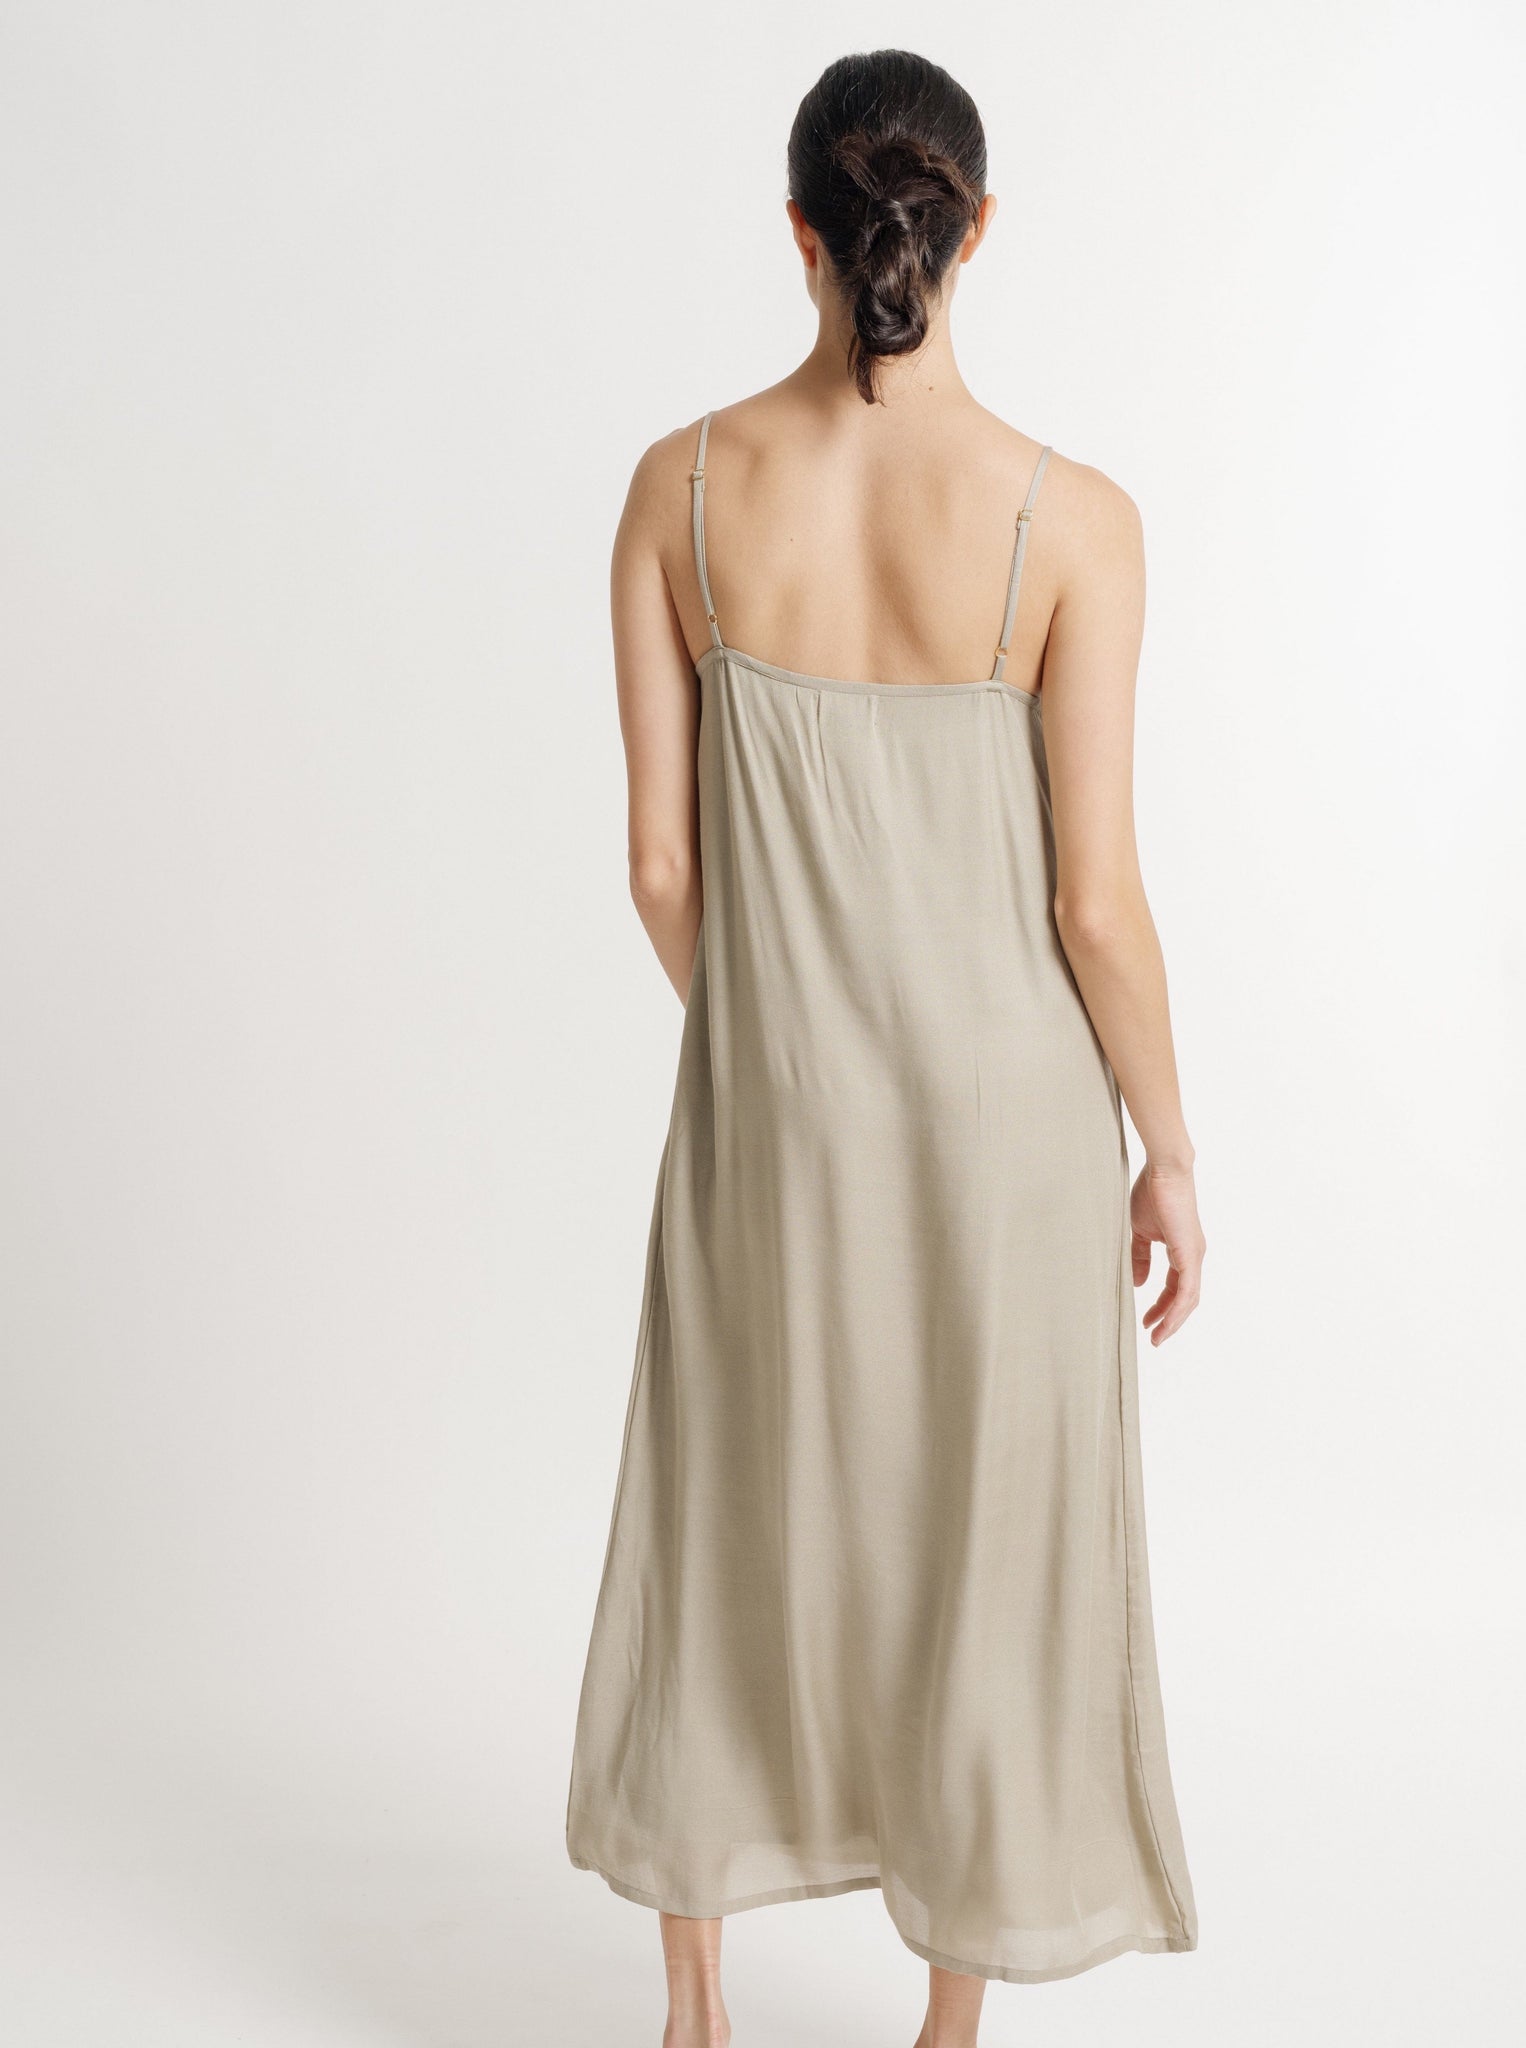 The back view of a woman wearing a 90's Maxi Slip Dress - Putty - Pre-order in sage Bemberg Cupro Crepe.